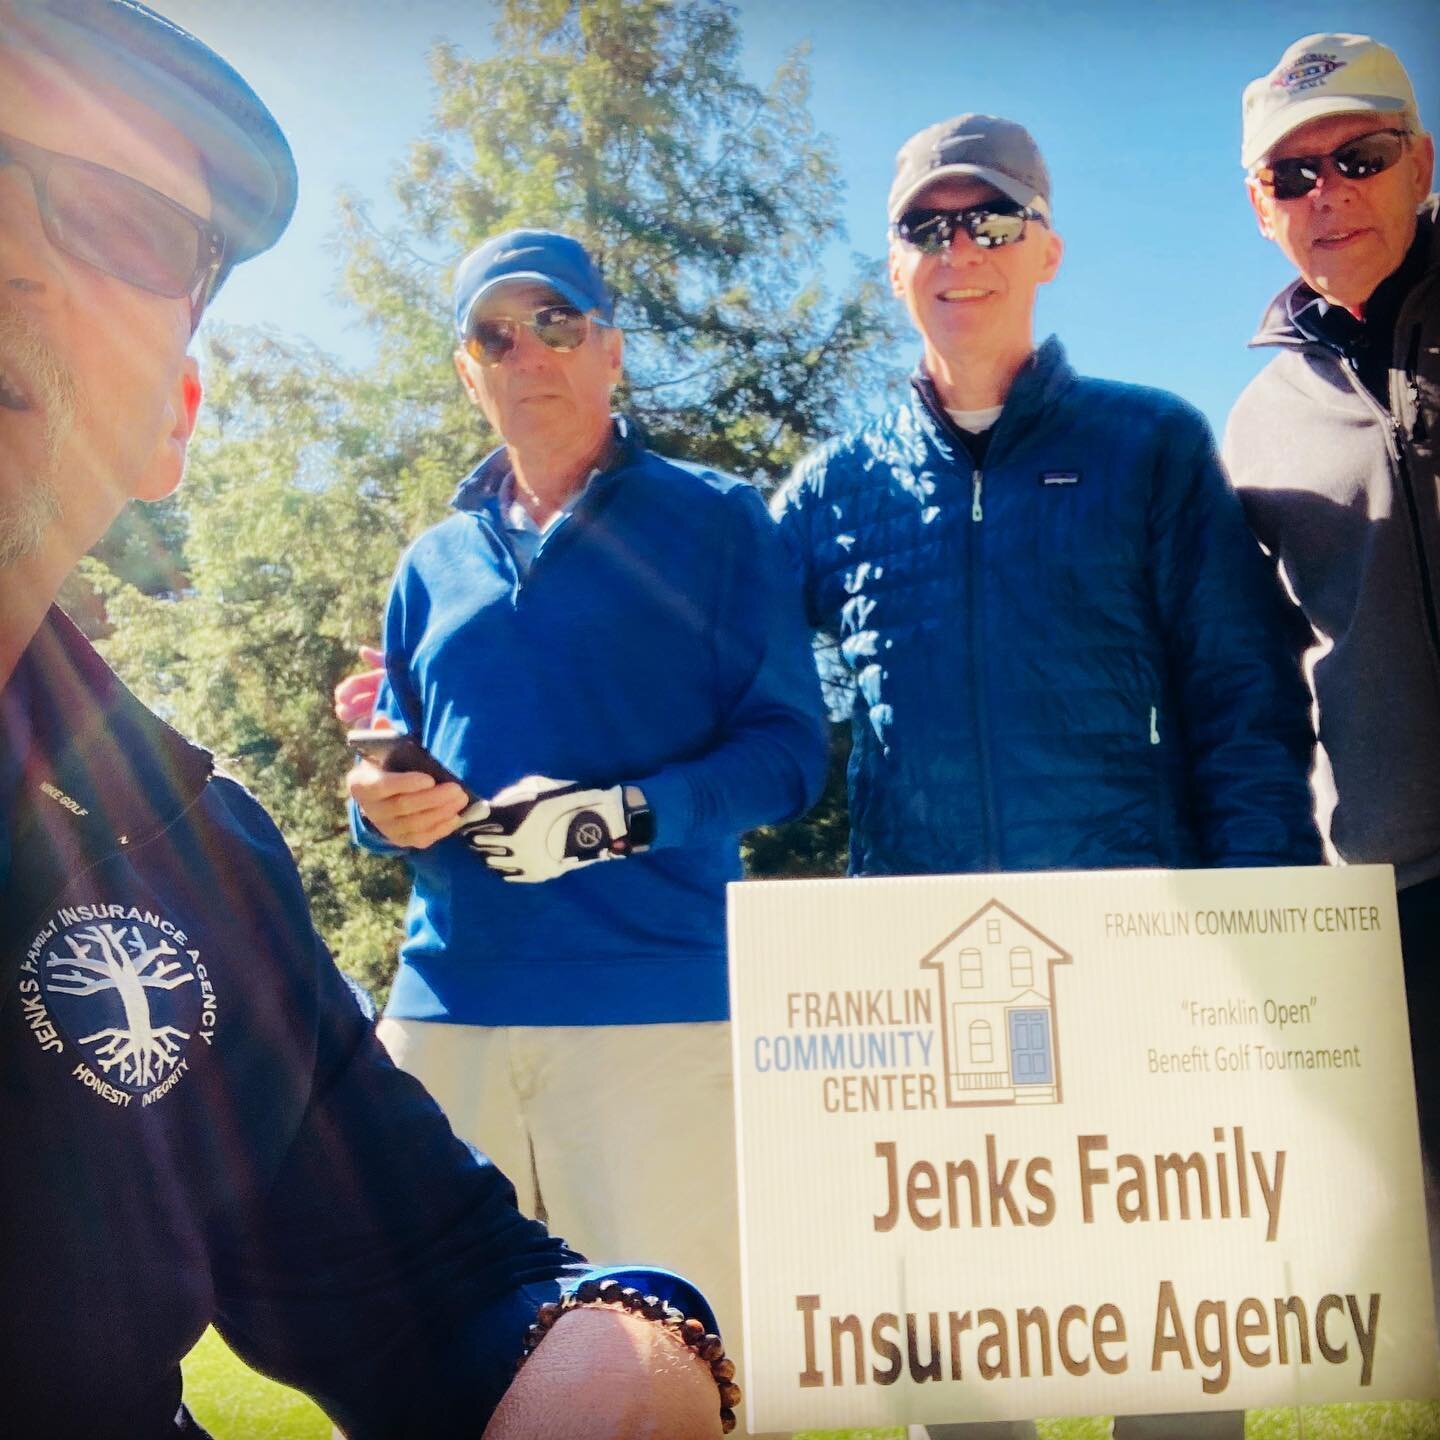 We didn&rsquo;t have the lowest score on the course but knowing we helped raise over $24,000 for Franklin Community Center we all left winners #jenksfamilyinsurance #franklincommunitycenter